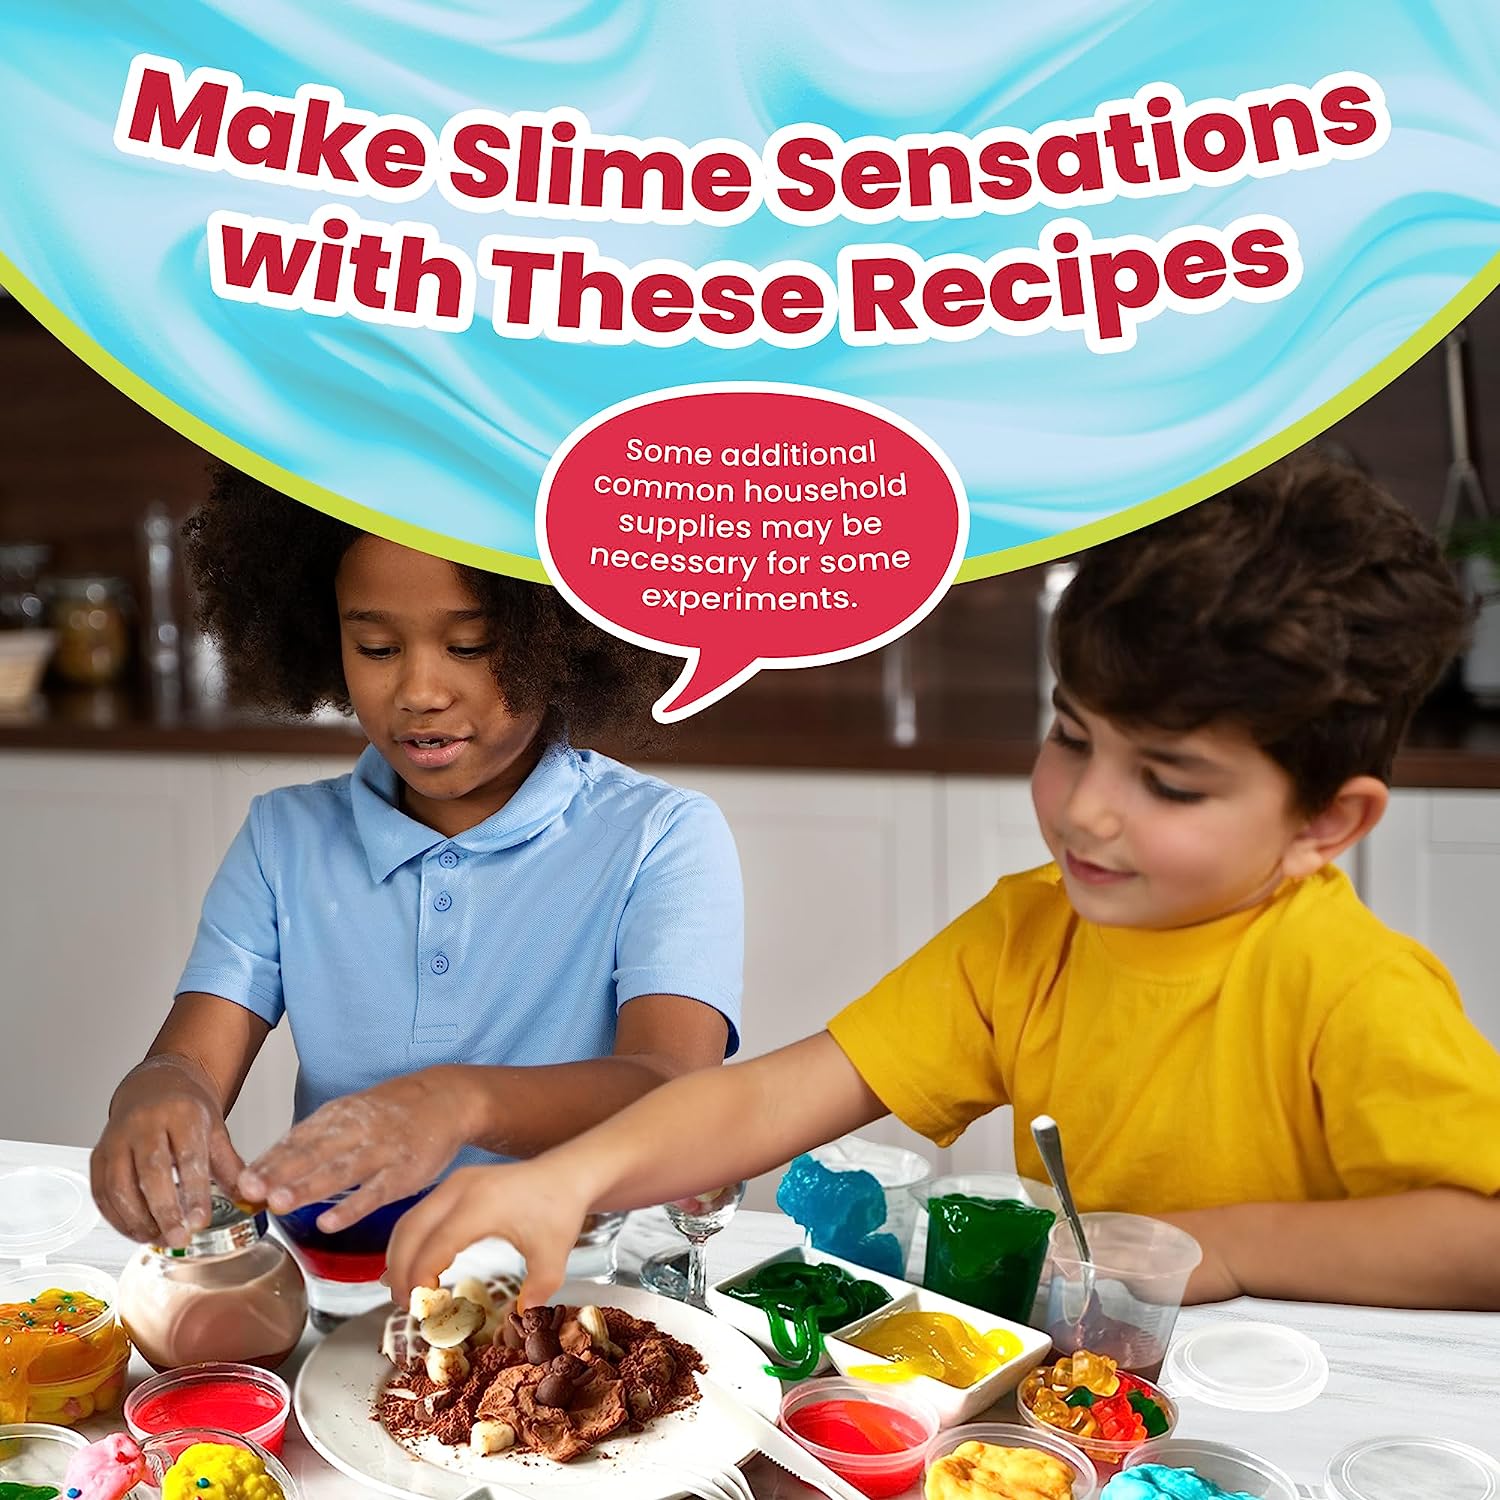 Playz Edible Slime Candy Food Science Chemistry Kit For Kids 8-12 With 25+  Stem & Diy Experiments : Target